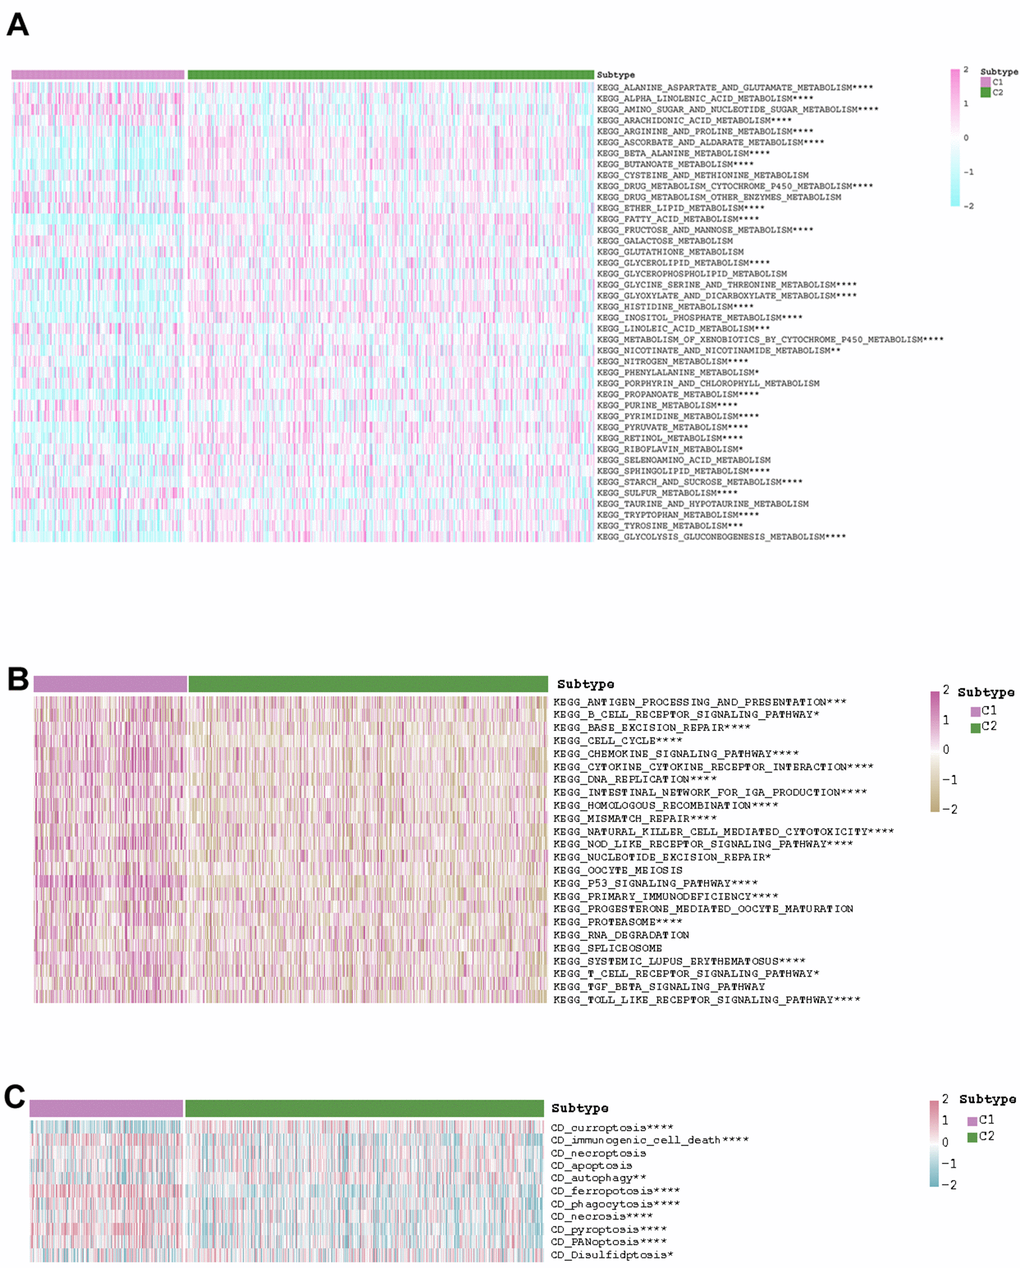 The exhibition of the distinct (A) metabolism-related pathways, (B) immune-related pathways, and (C) cell deaths in the two KIRC subtypes.